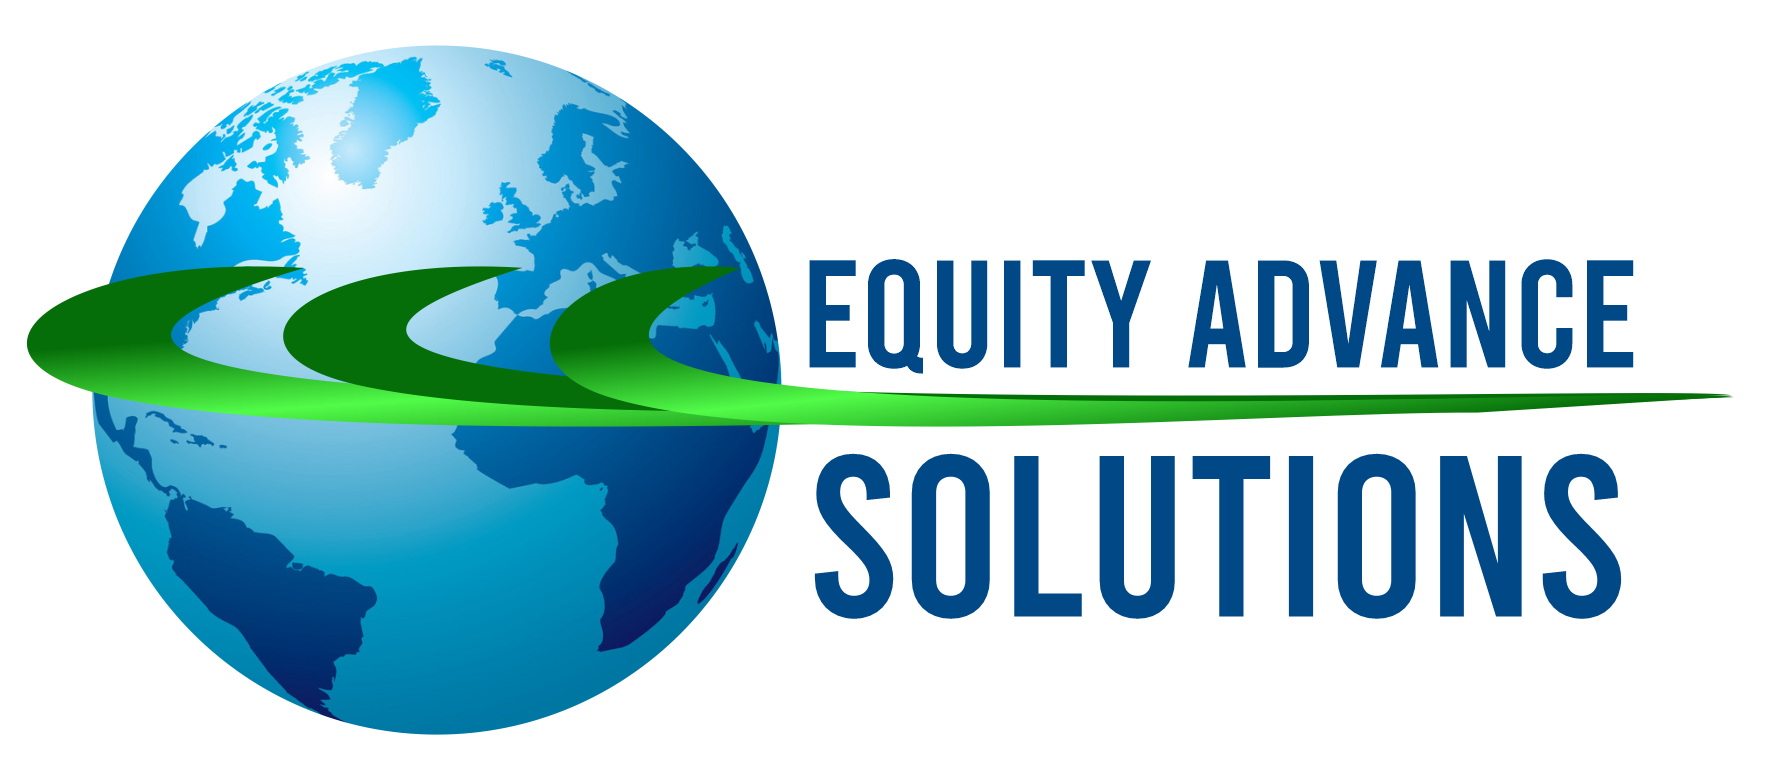 Equity Advance Solutions